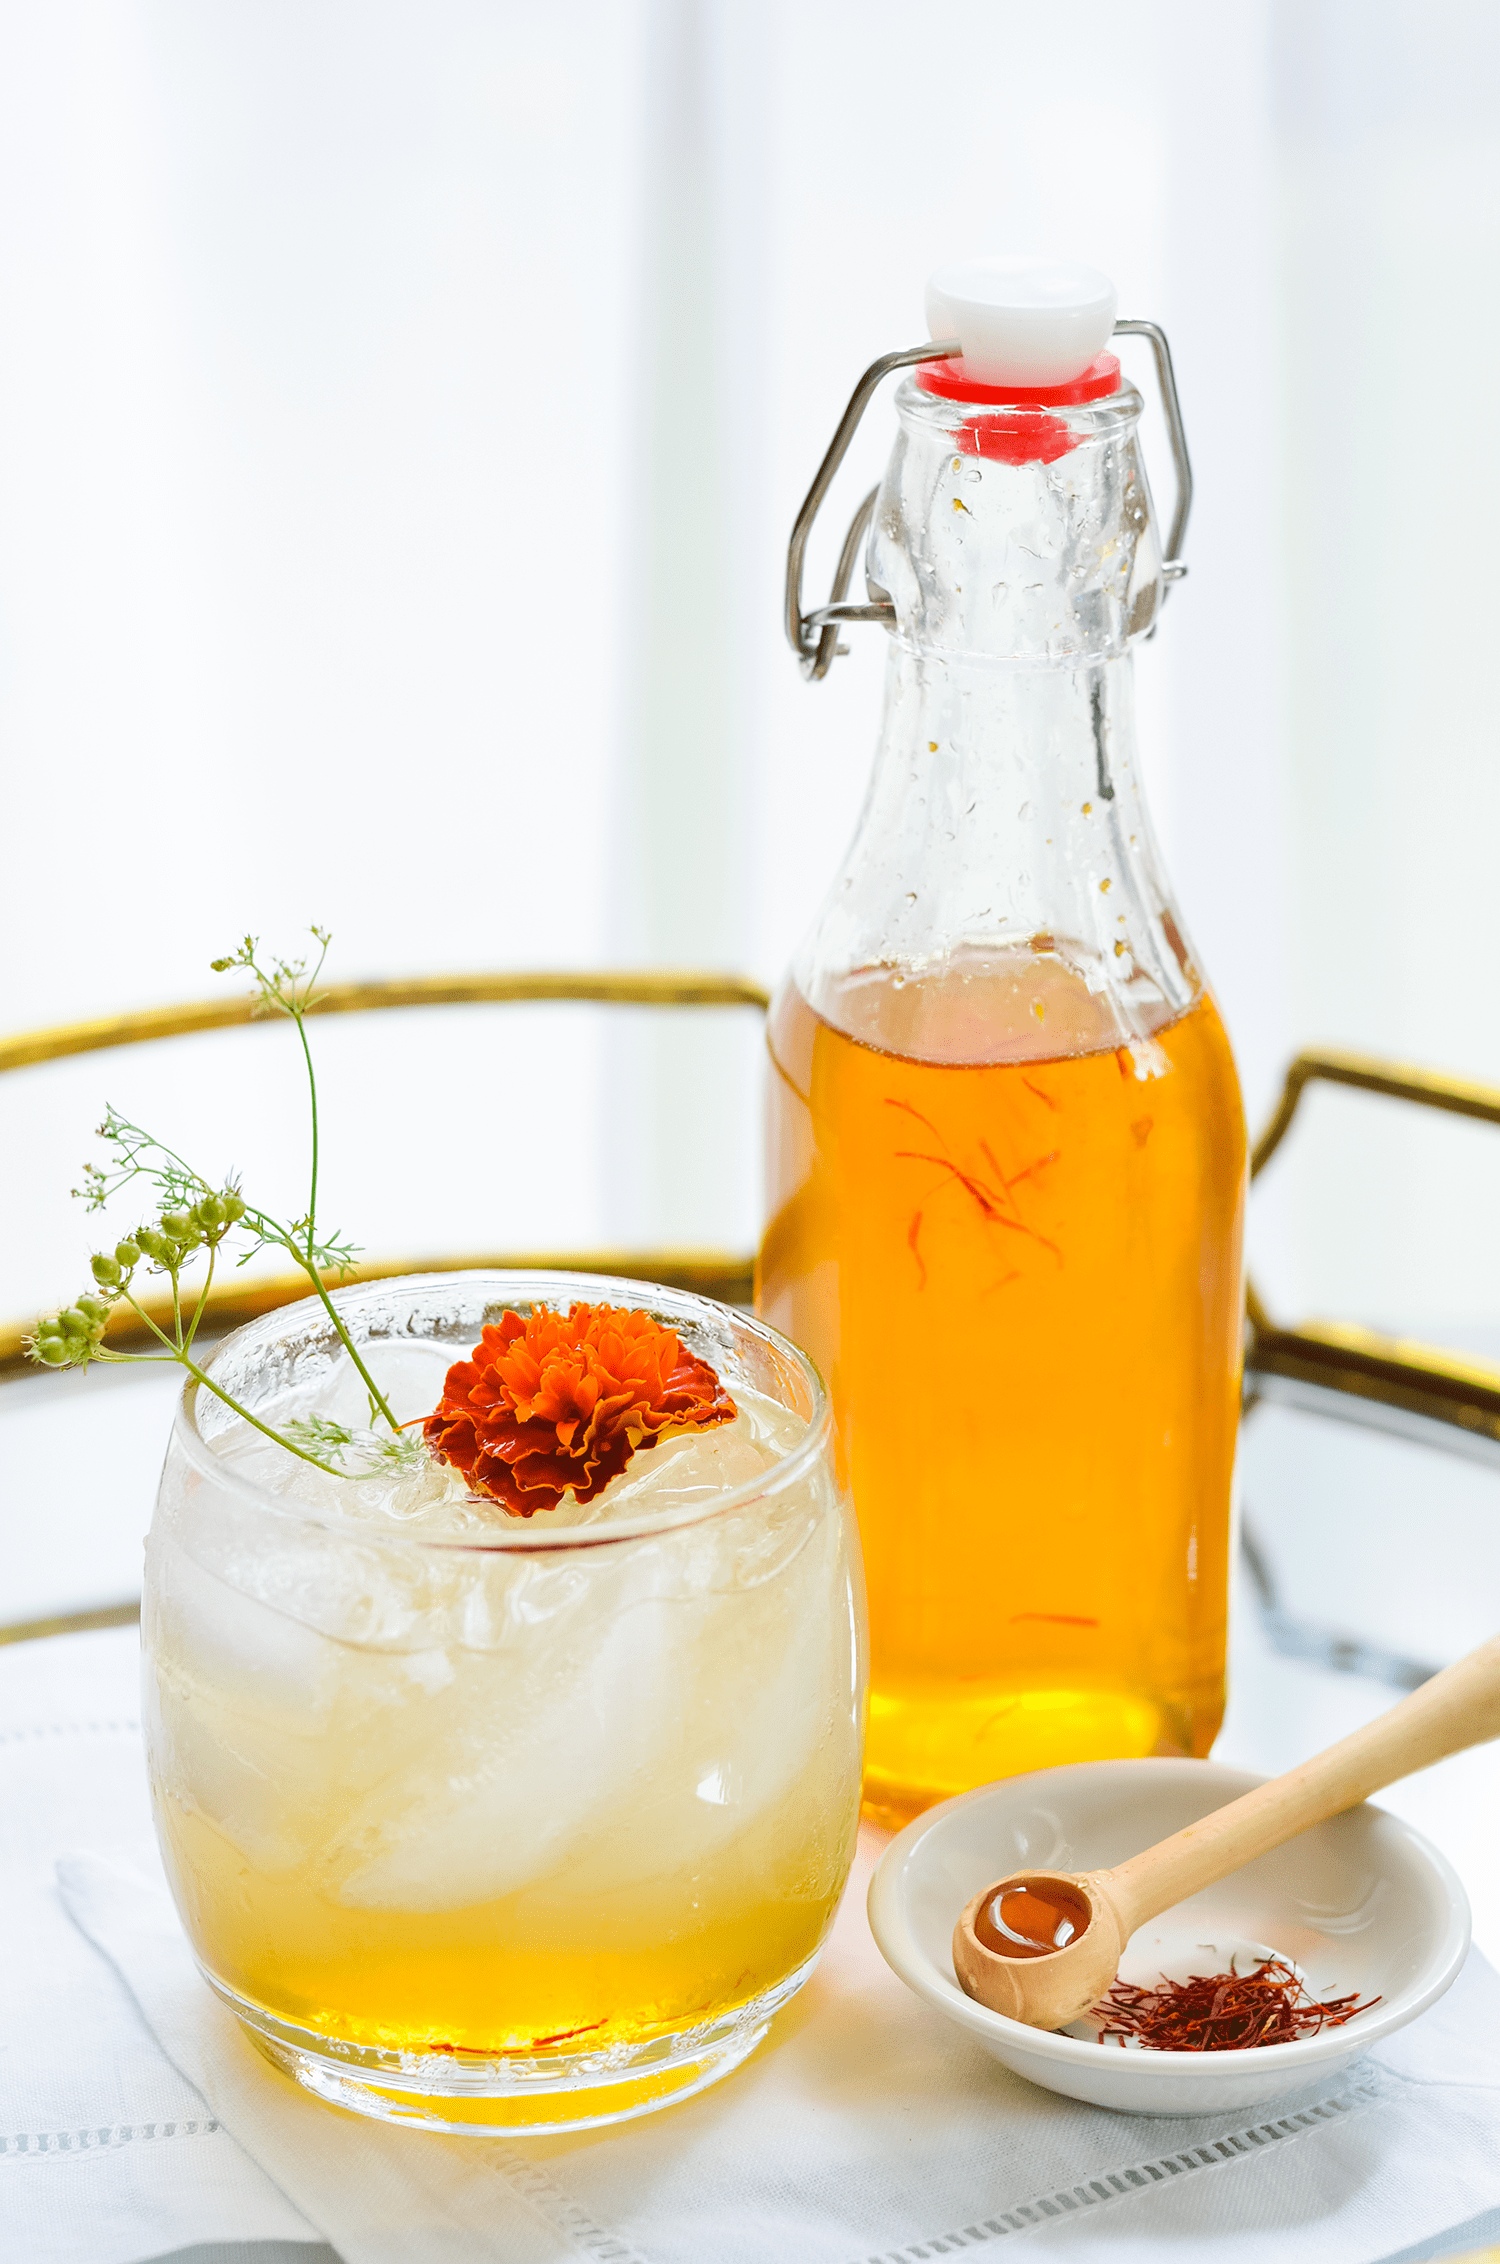 Make Your Own Honey Saffron Simple Syrup! (Click through for recipe)